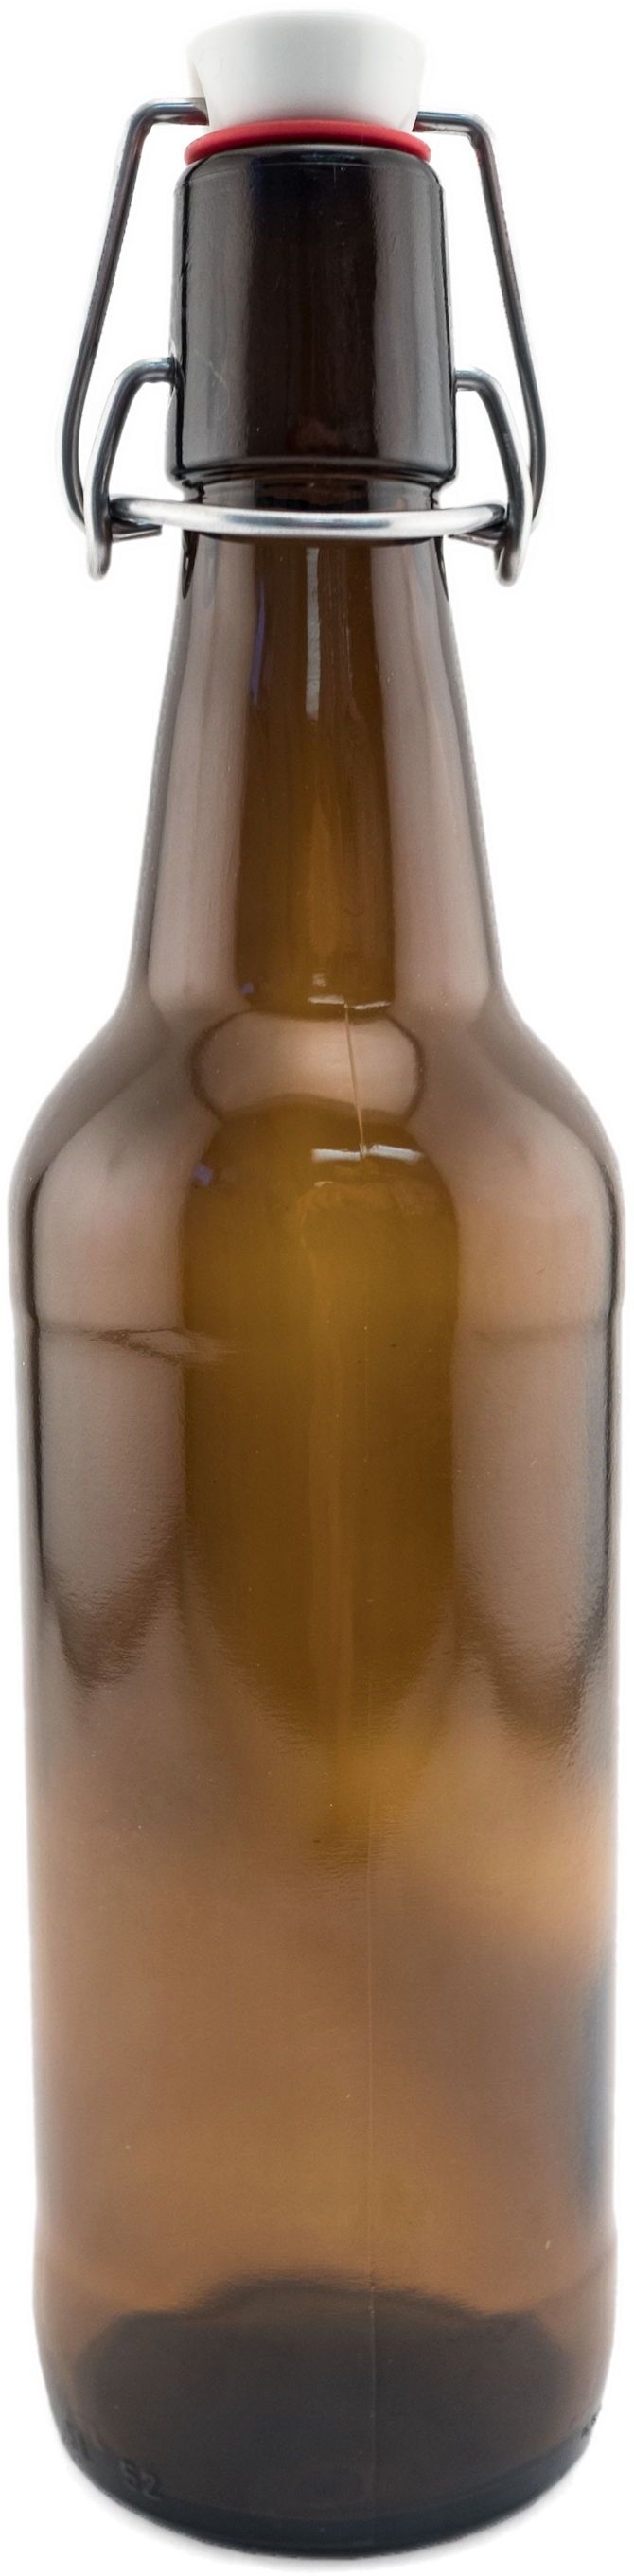 Brown Bottle Glass Free Clipart HQ PNG Image